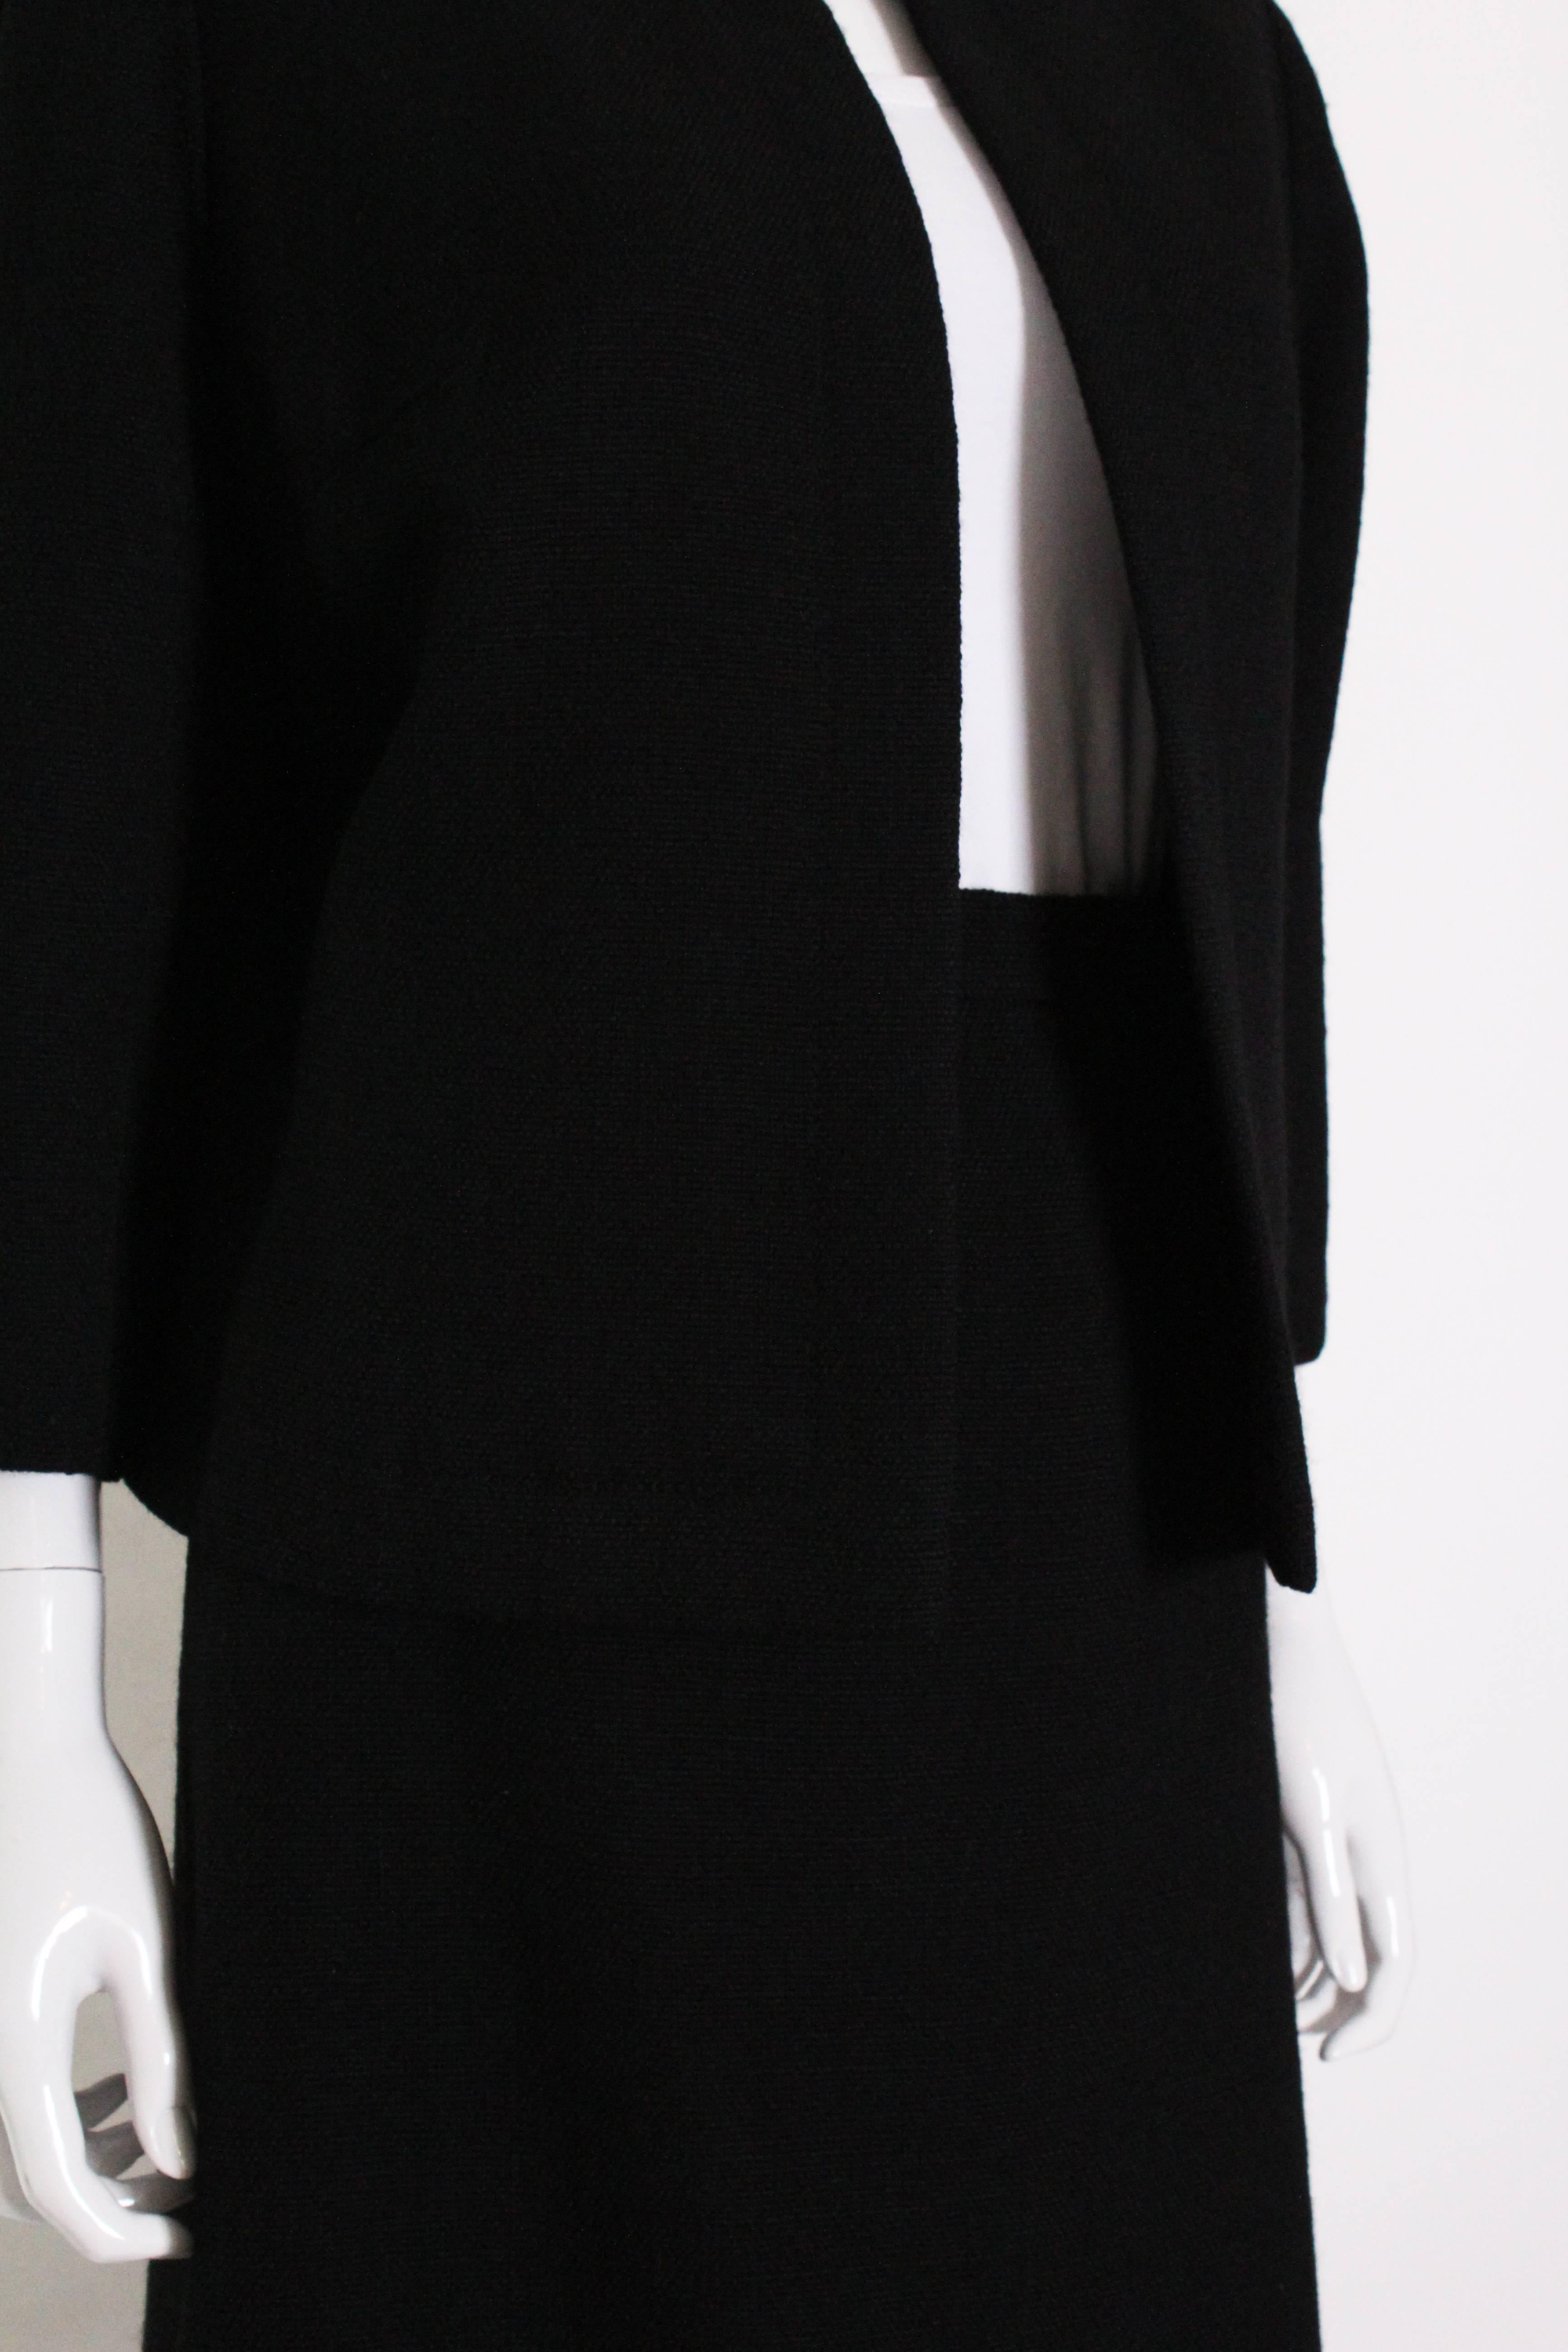 Christian Dior Black Skirt Suit In Good Condition In London, GB